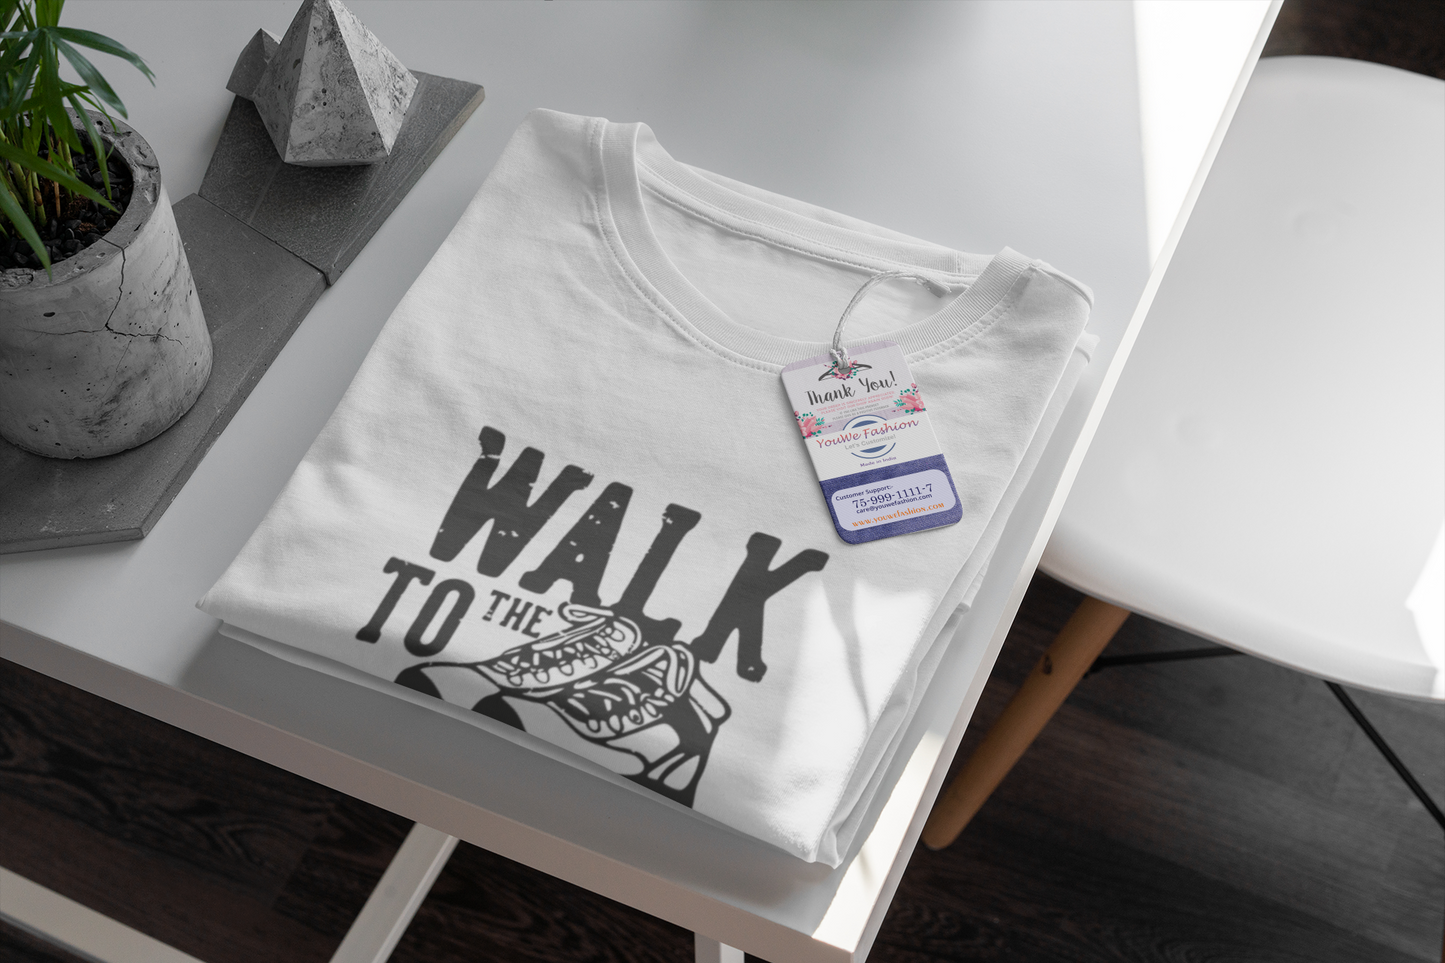 YouWe Fashion "Walk to Wild" White Cotton T-Shirt for Youth (S-XL) (Copy)